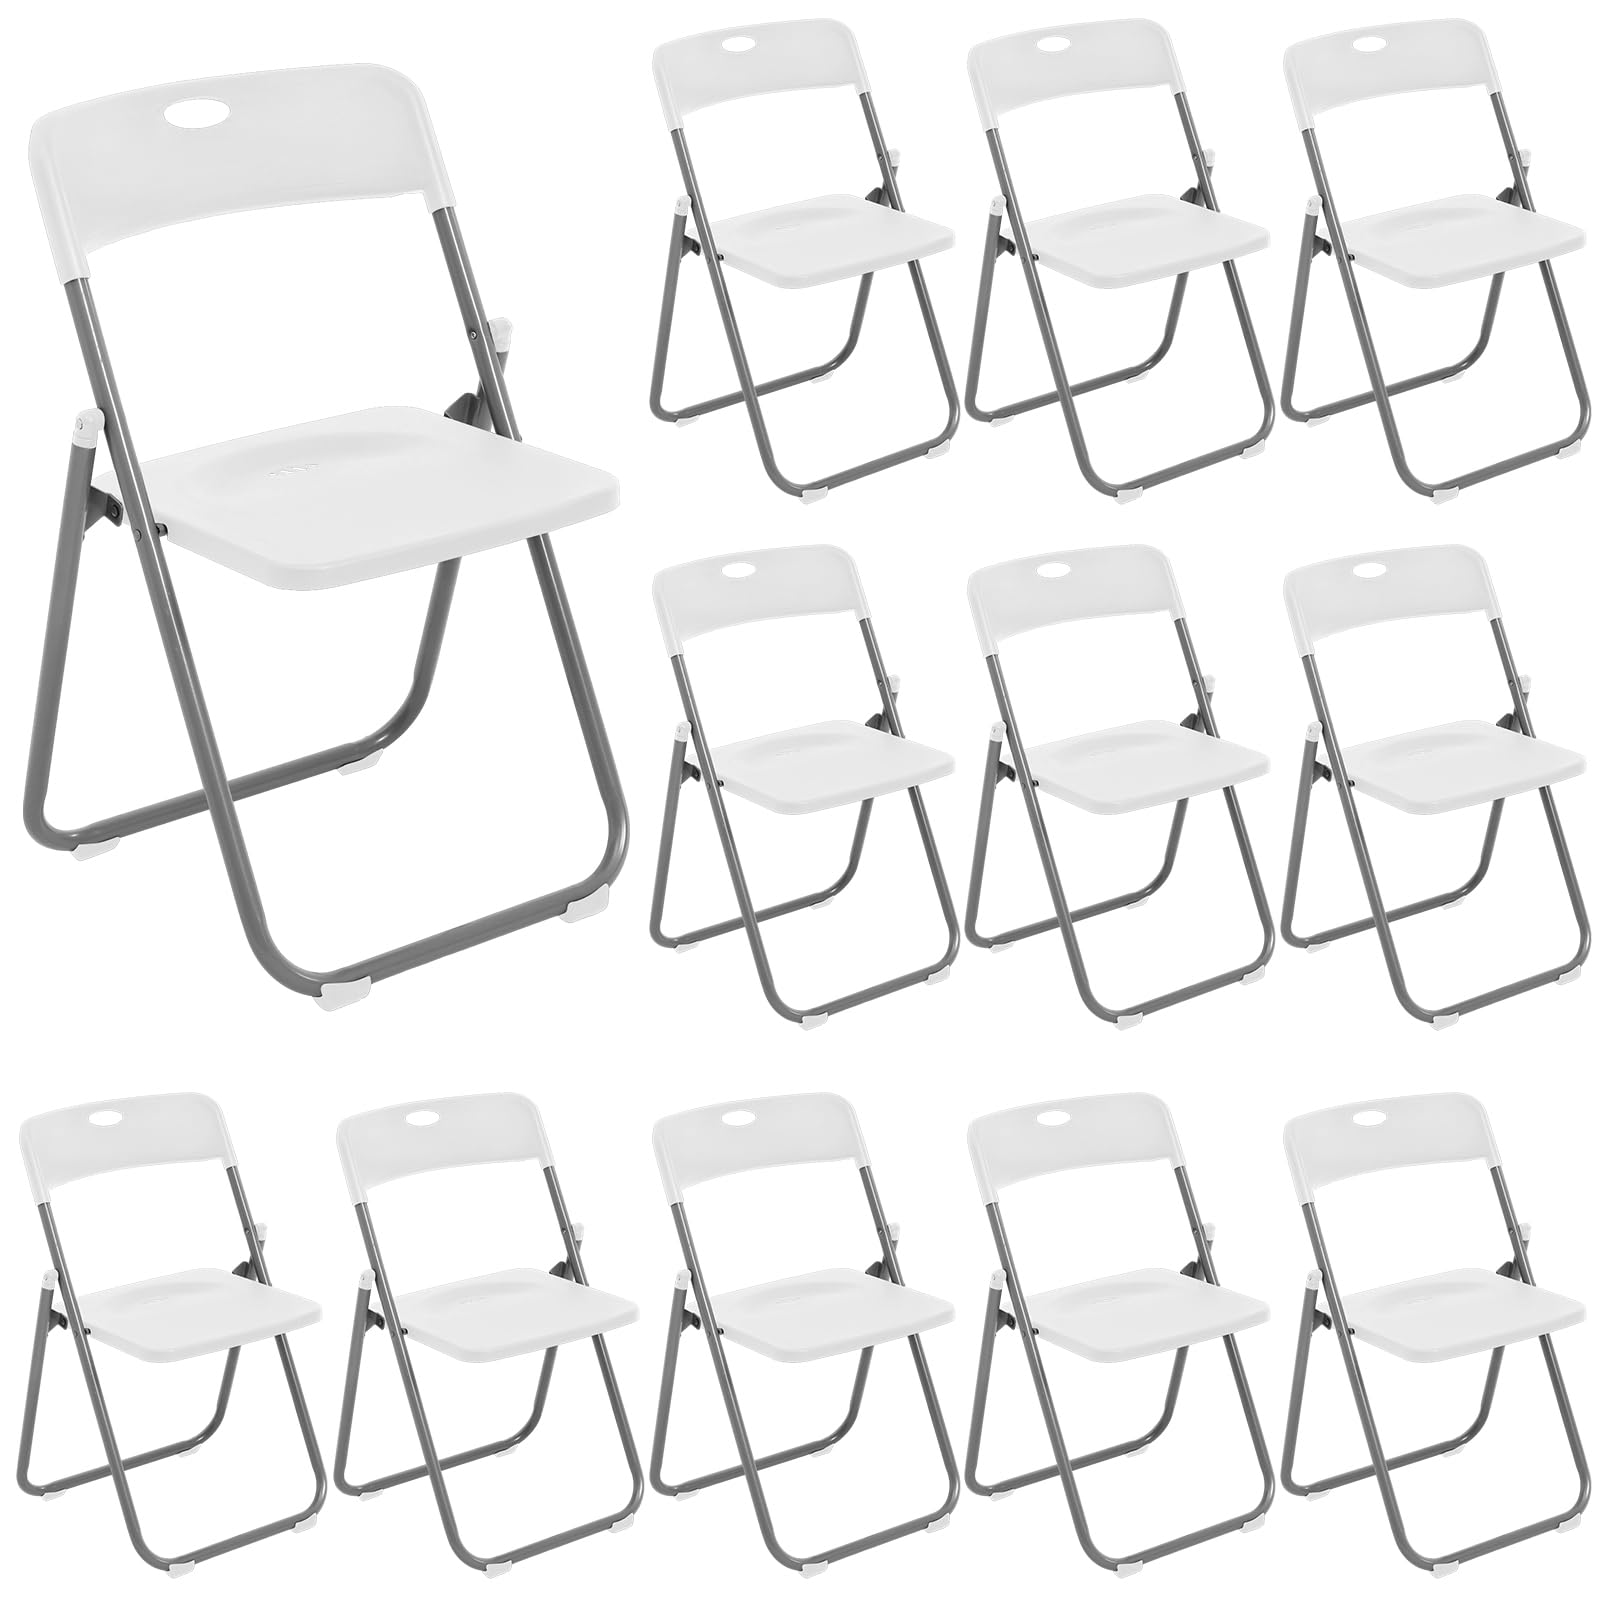 Kigley 12 Pack Folding Plastic Chair with 330lb Capacity Stackable Folding Chair Portable Metal Foldable Chair Fold up Event Chairs for Wedding Party Office Dining Supplies Indoor Outdoor (White)